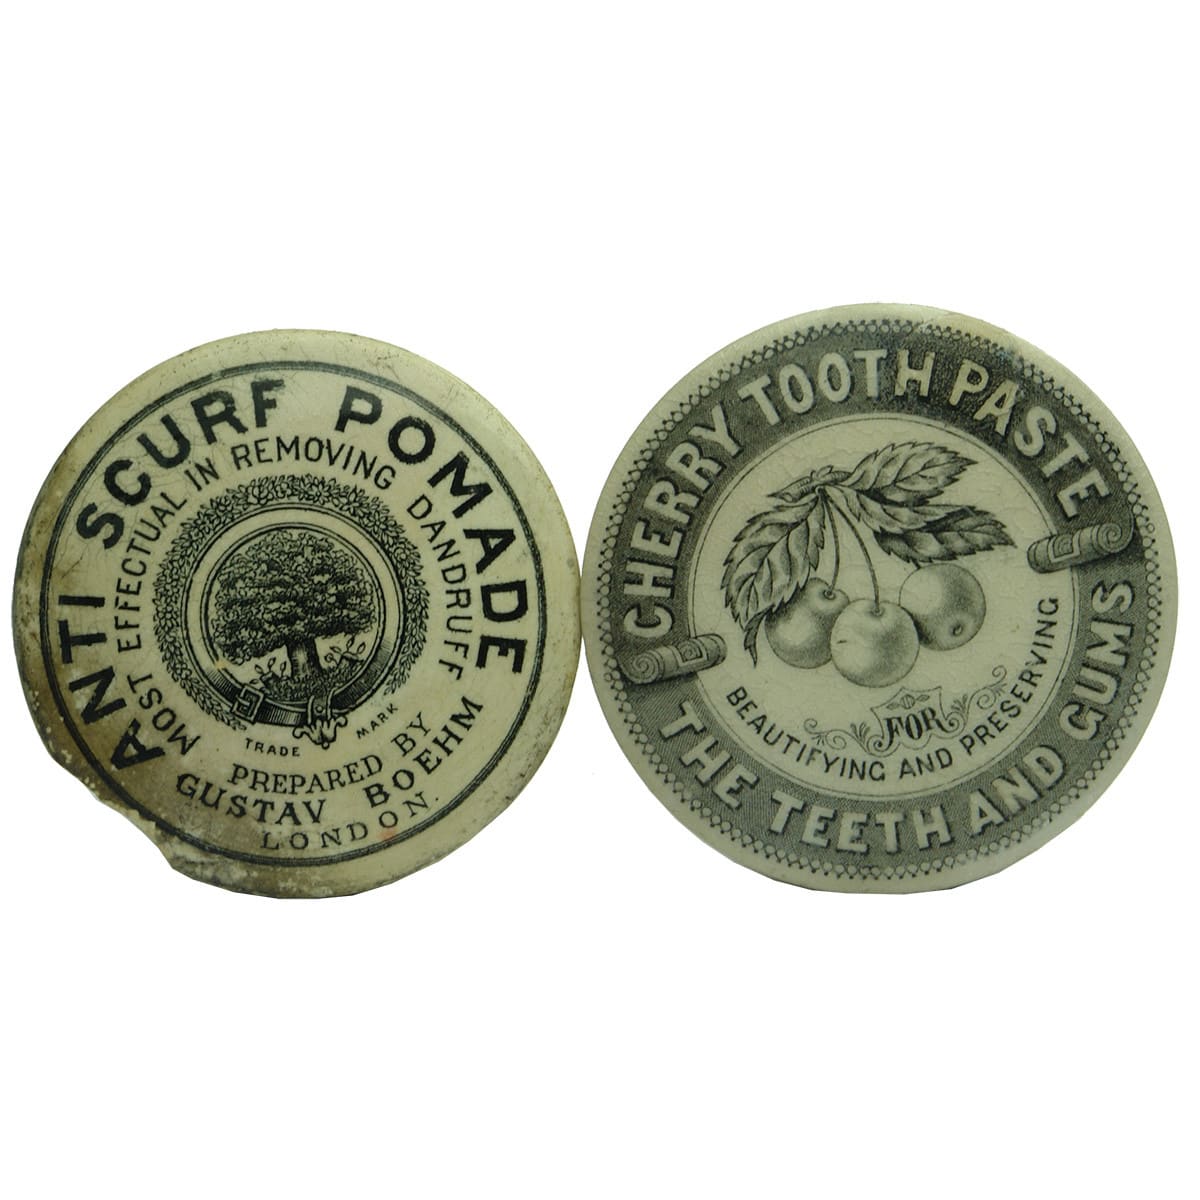 Pair of Pot Lids: Anti-Scurf Pomade, Gustav Boehm, London and Black & White Cherry Tooth Paste with Cherries.